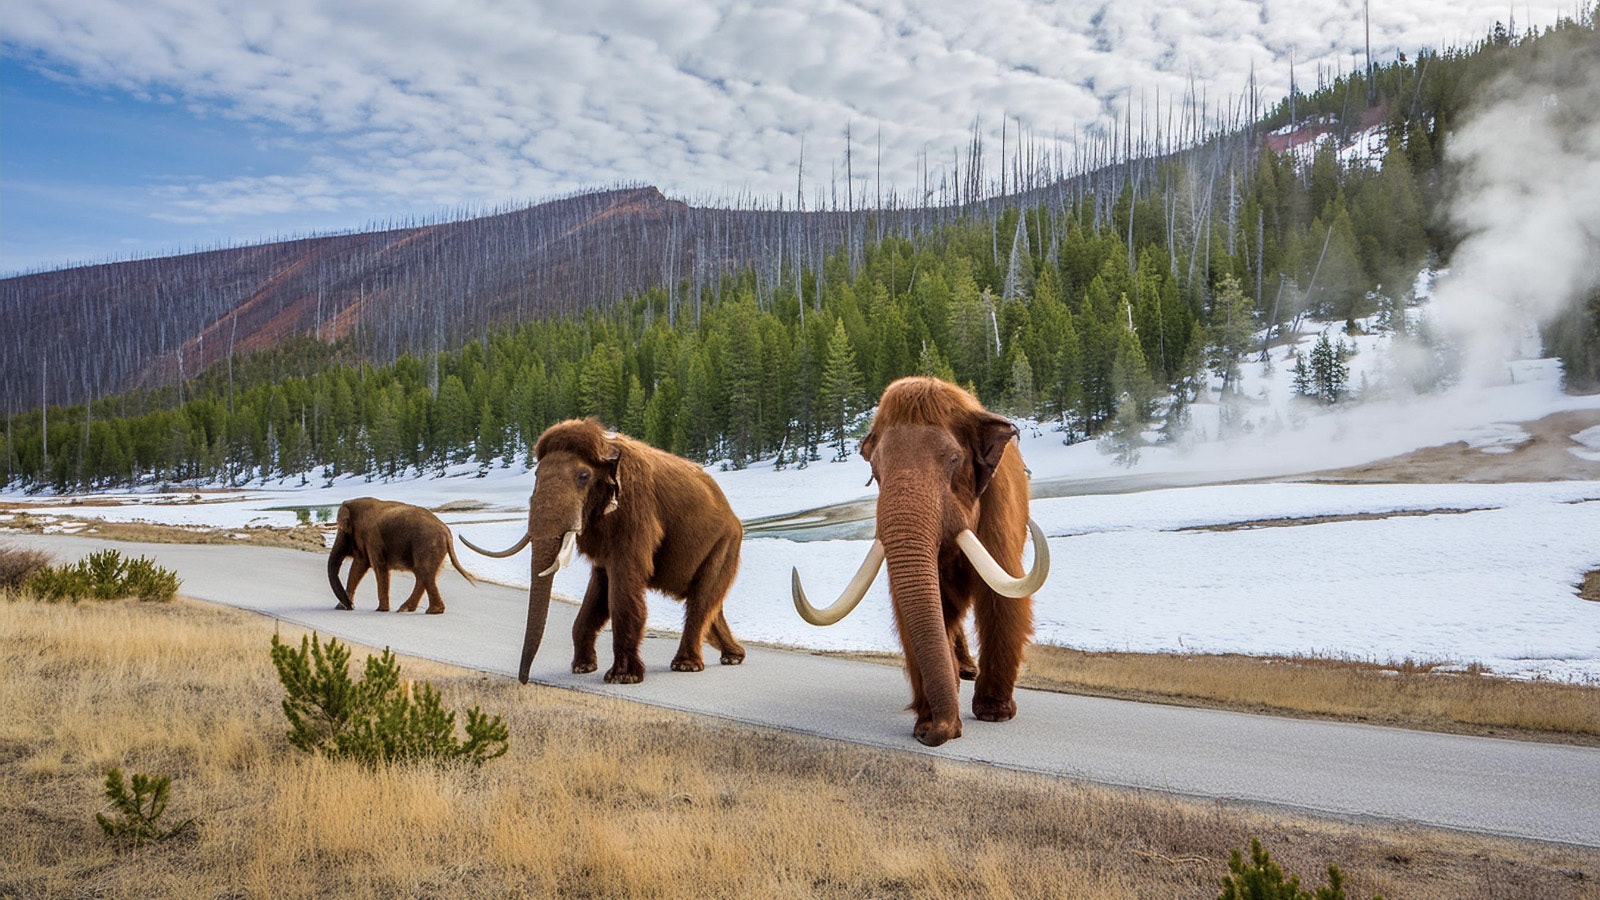 This illustration generated by PhotoShop's artificial intelligence generator shows what it could look like if prehistoric wooly mammoths were introduced into Yellowstone National Park.